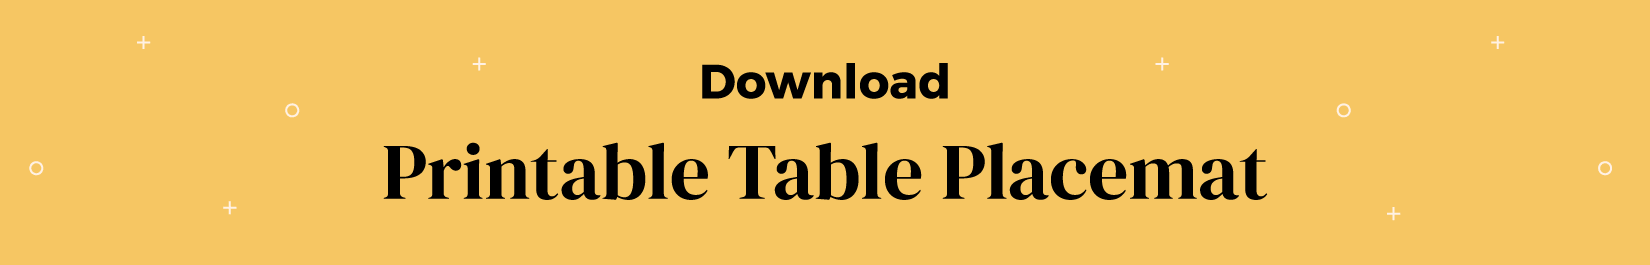 Download button for printable dinner table placemat.